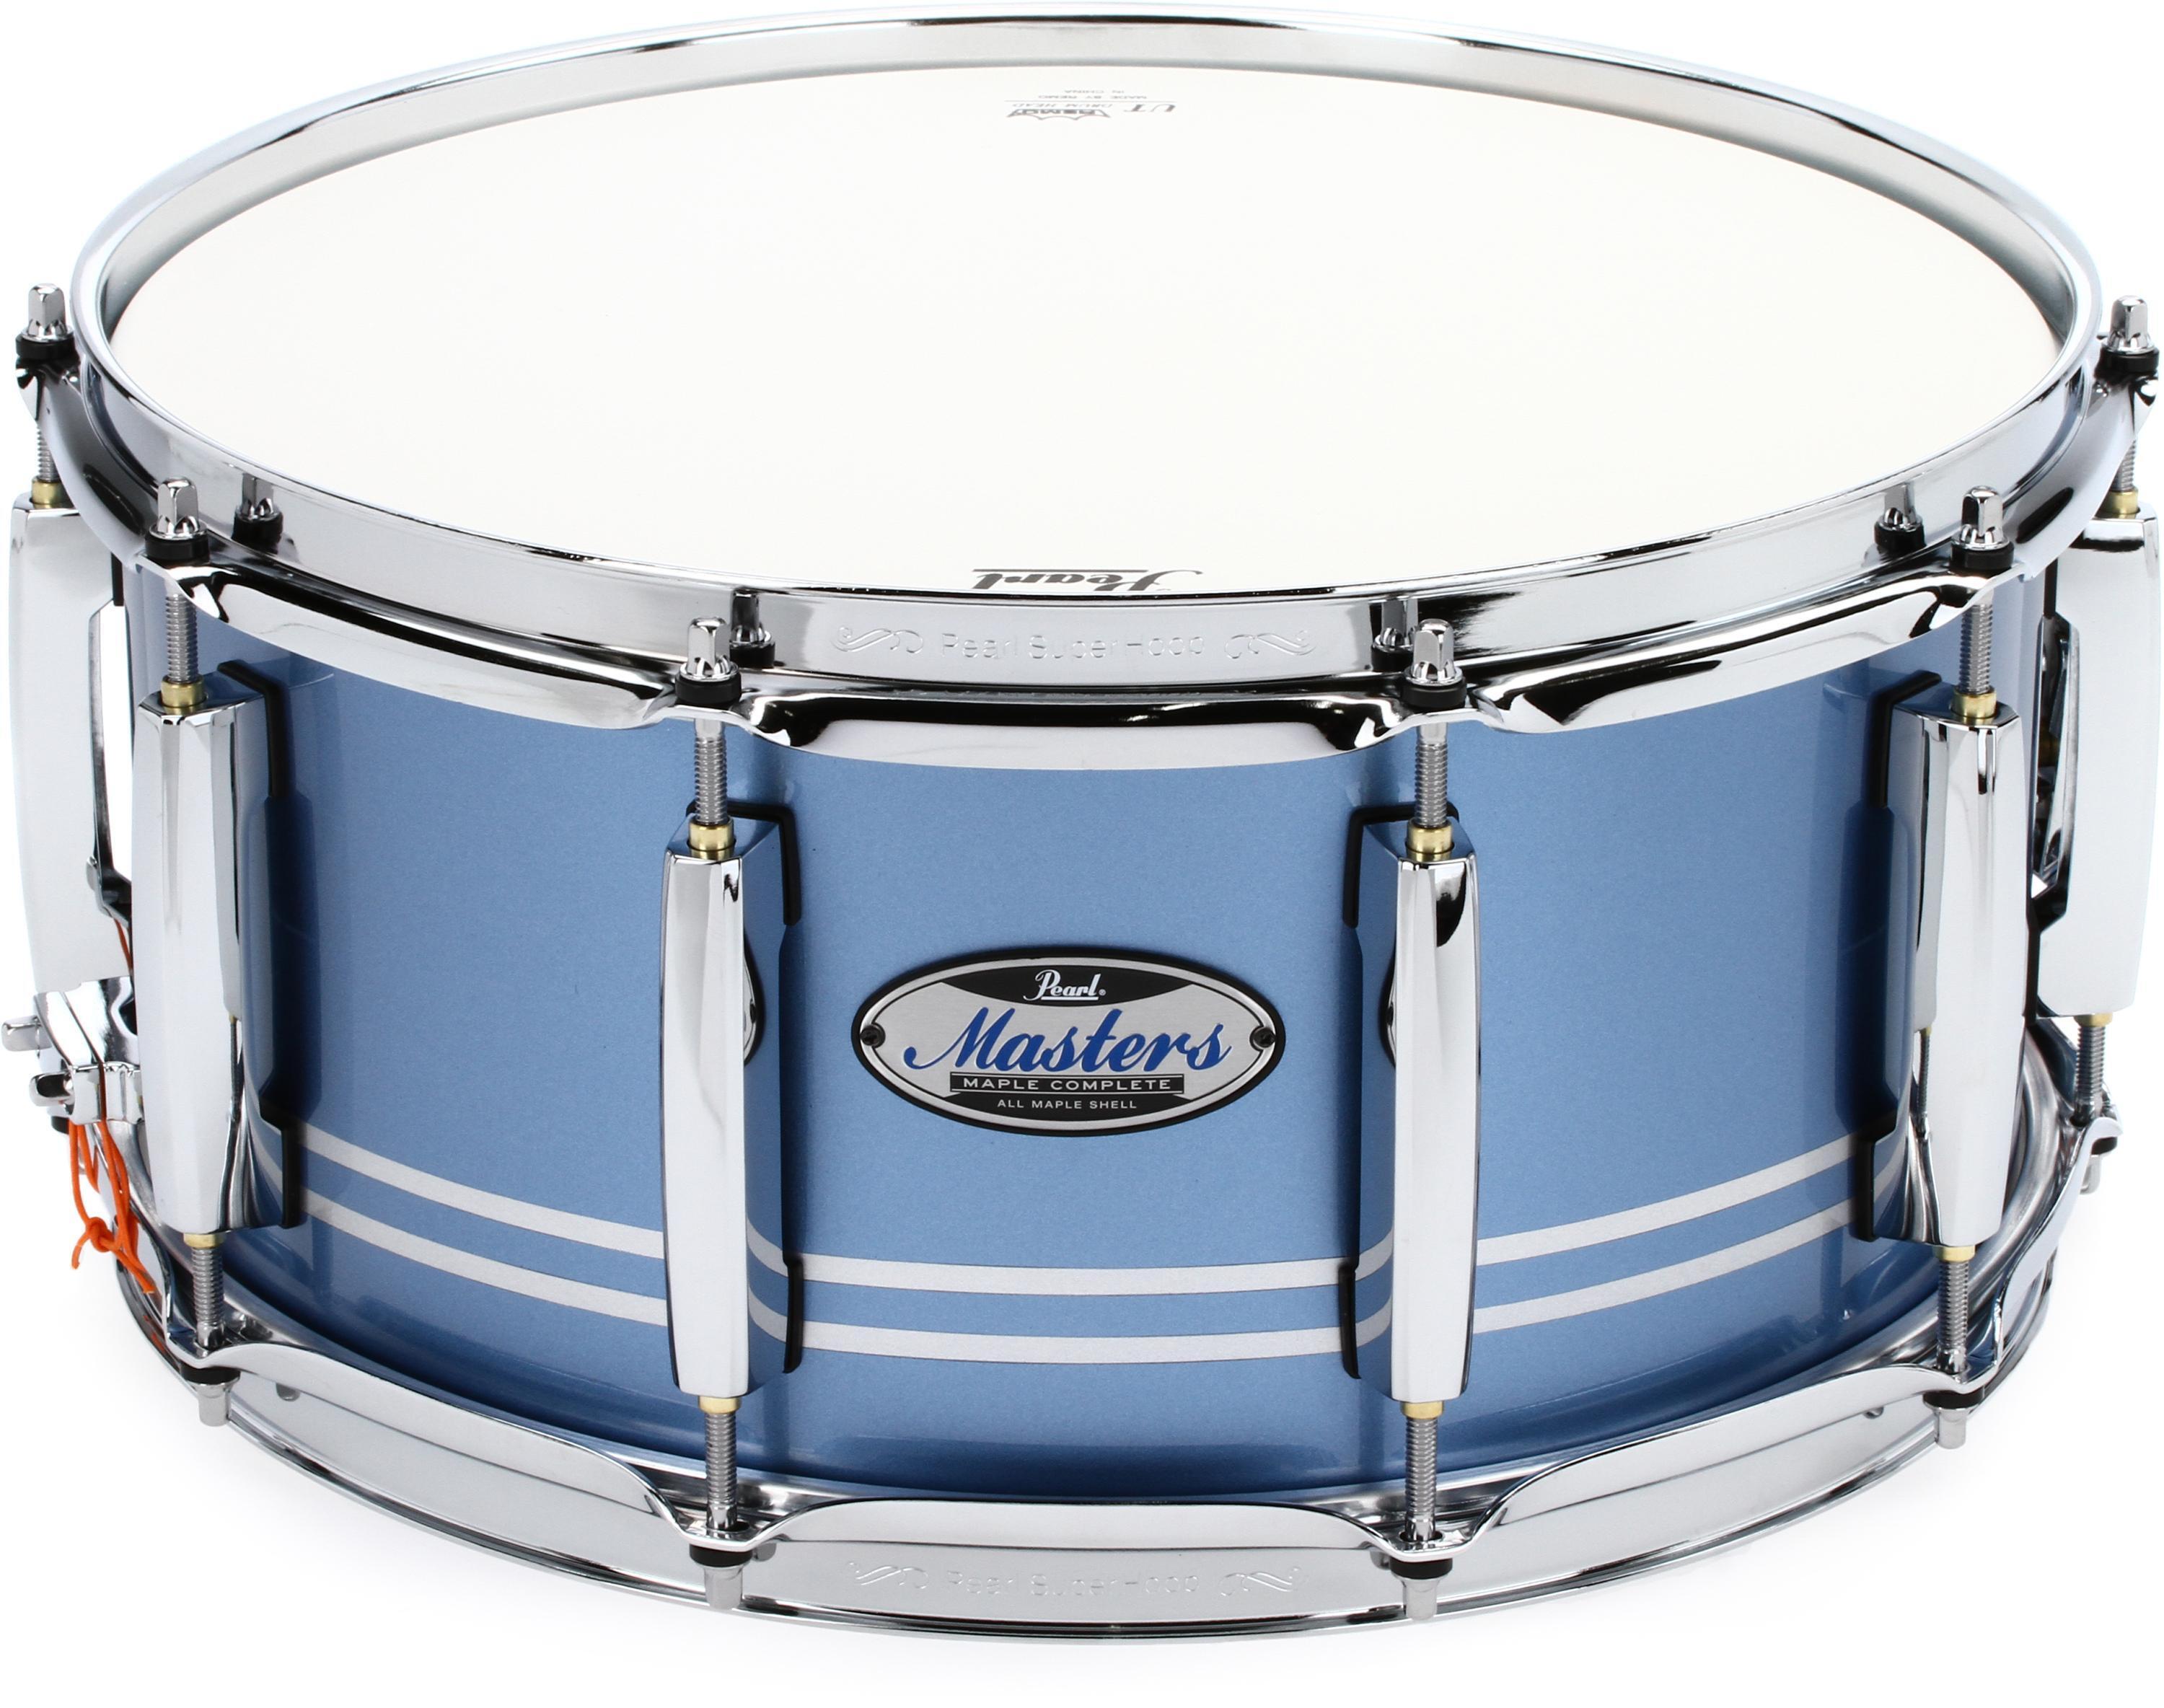 Masters Maple Complete Snare Drum - 14 x 6.5 inch - Chrome